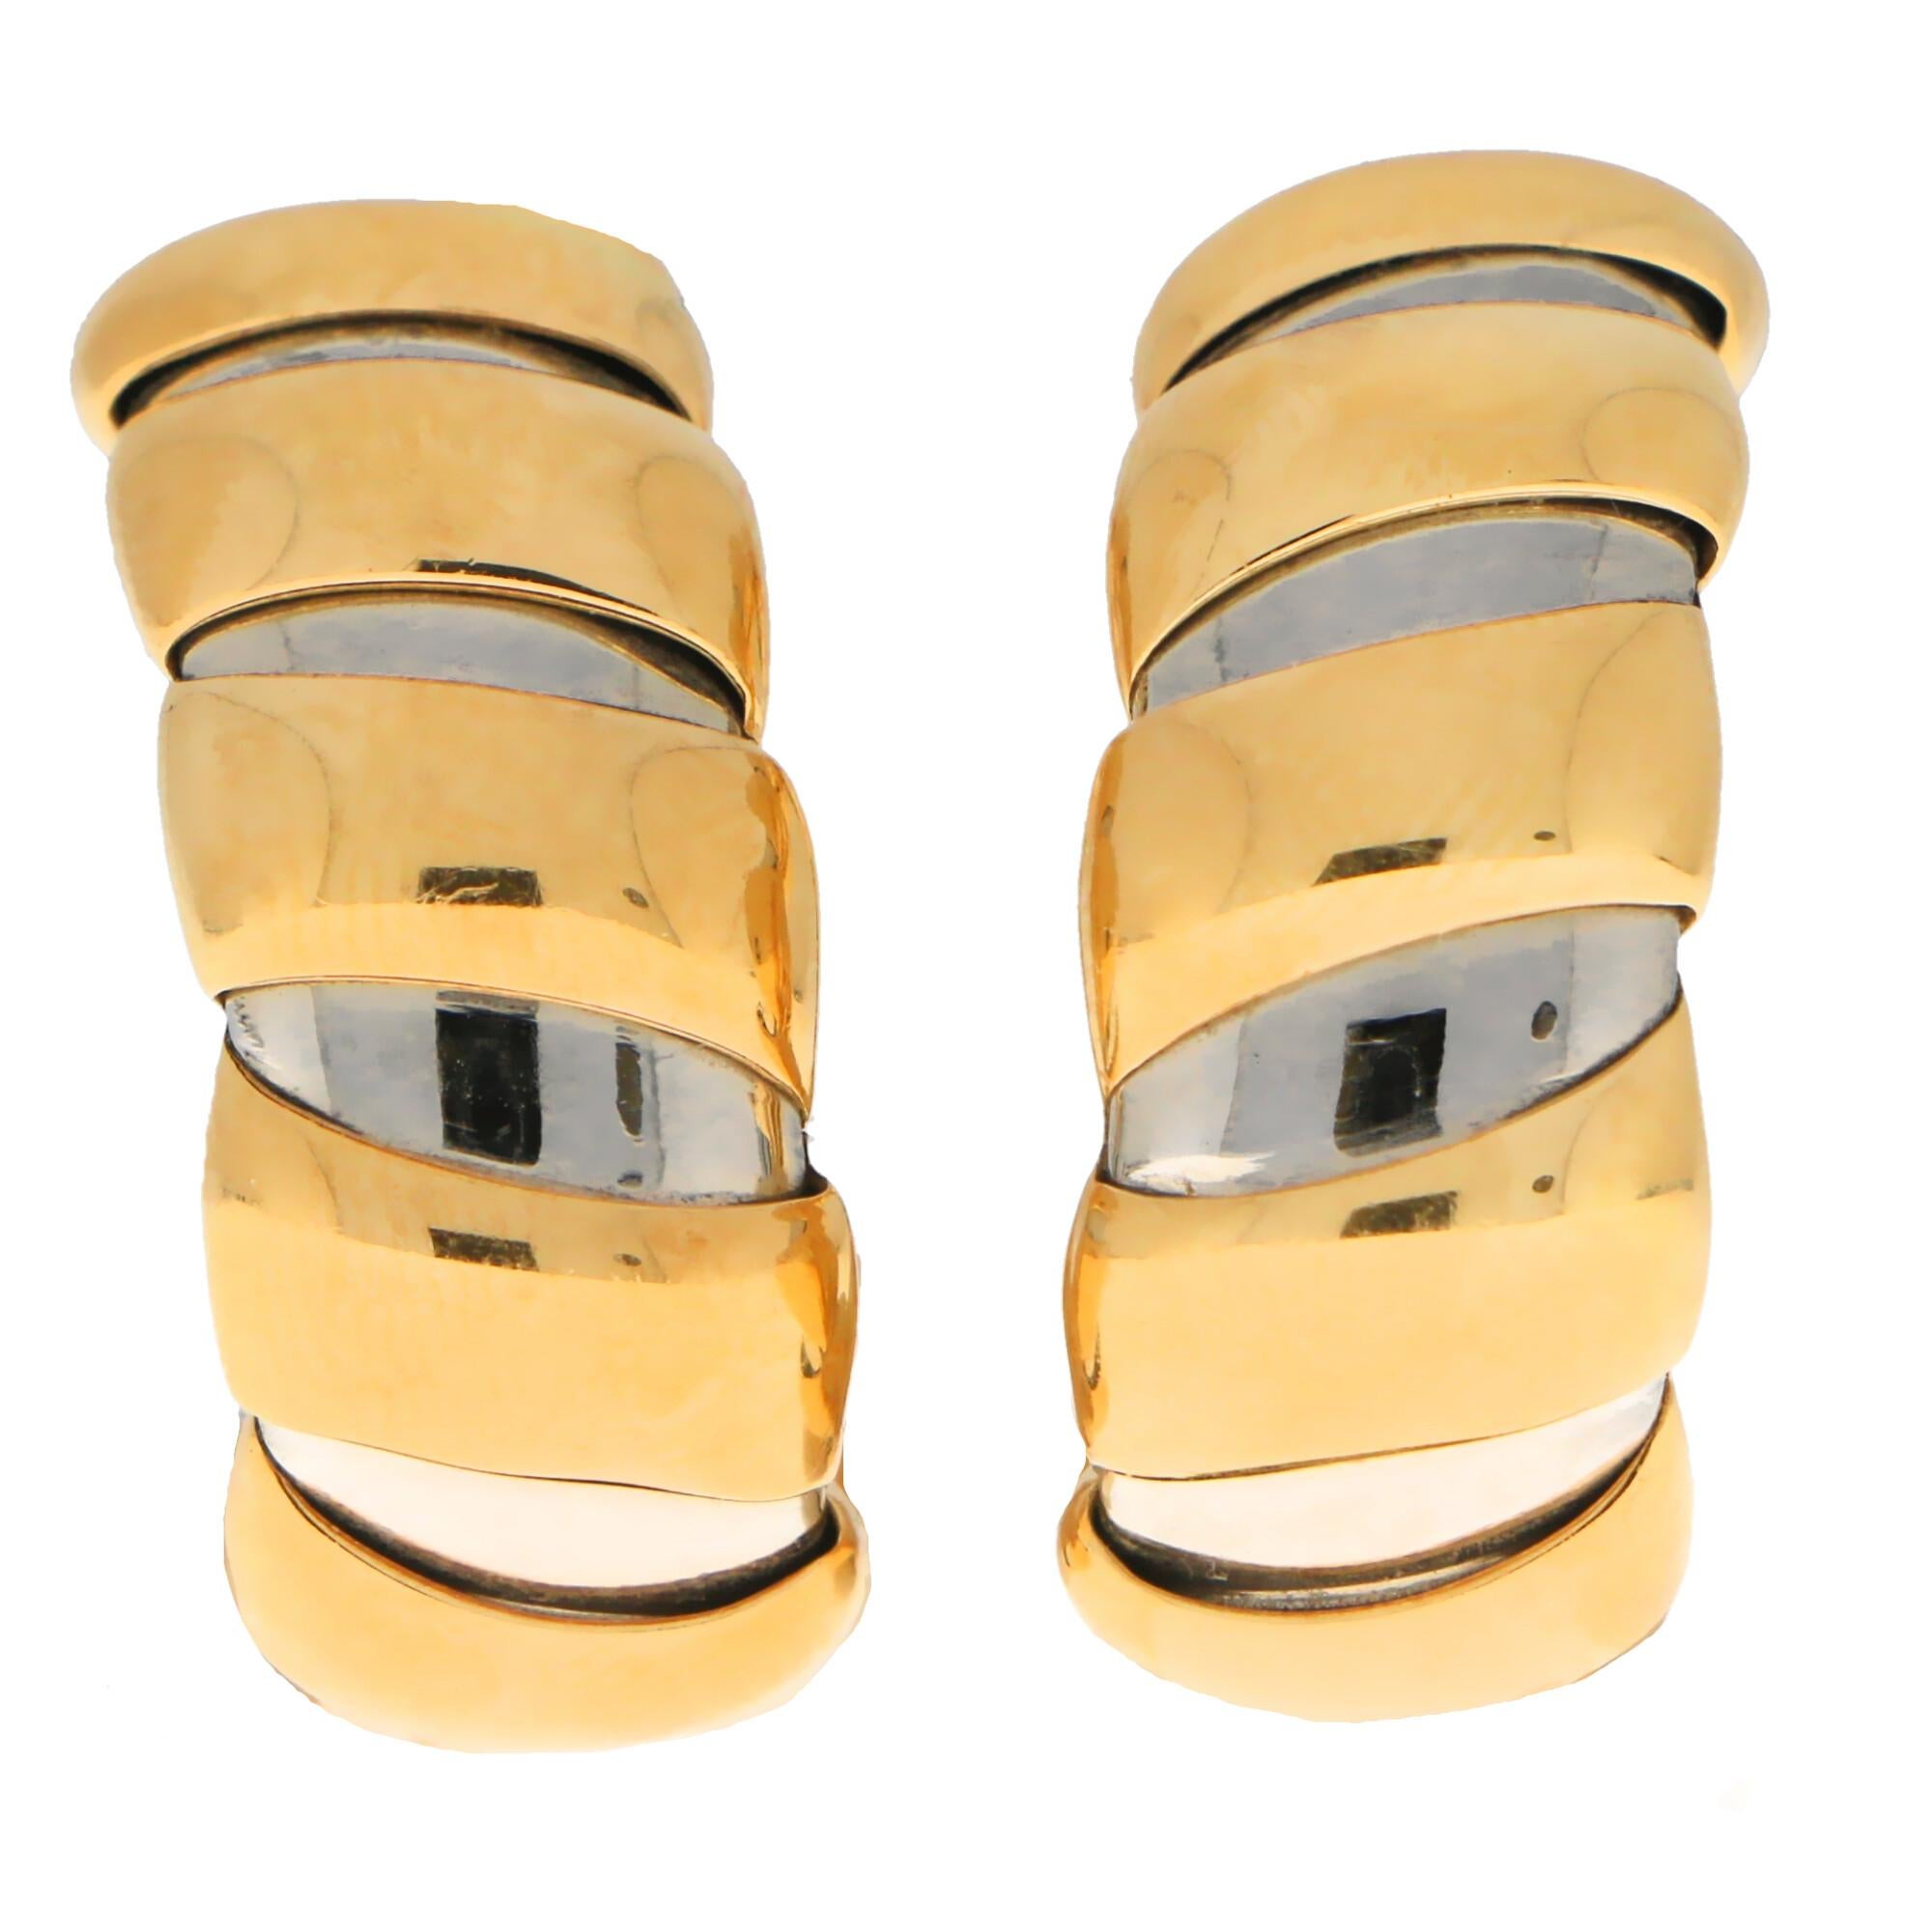 A lovely pair of Bvlgari Tubogas earrings set in 18k yellow gold and stainless steel. 

Each earring is composed of 8 polished yellow gold pipe bands on top of a flexible stainless steel half hoop. The contrast of the yellow gold against the steel